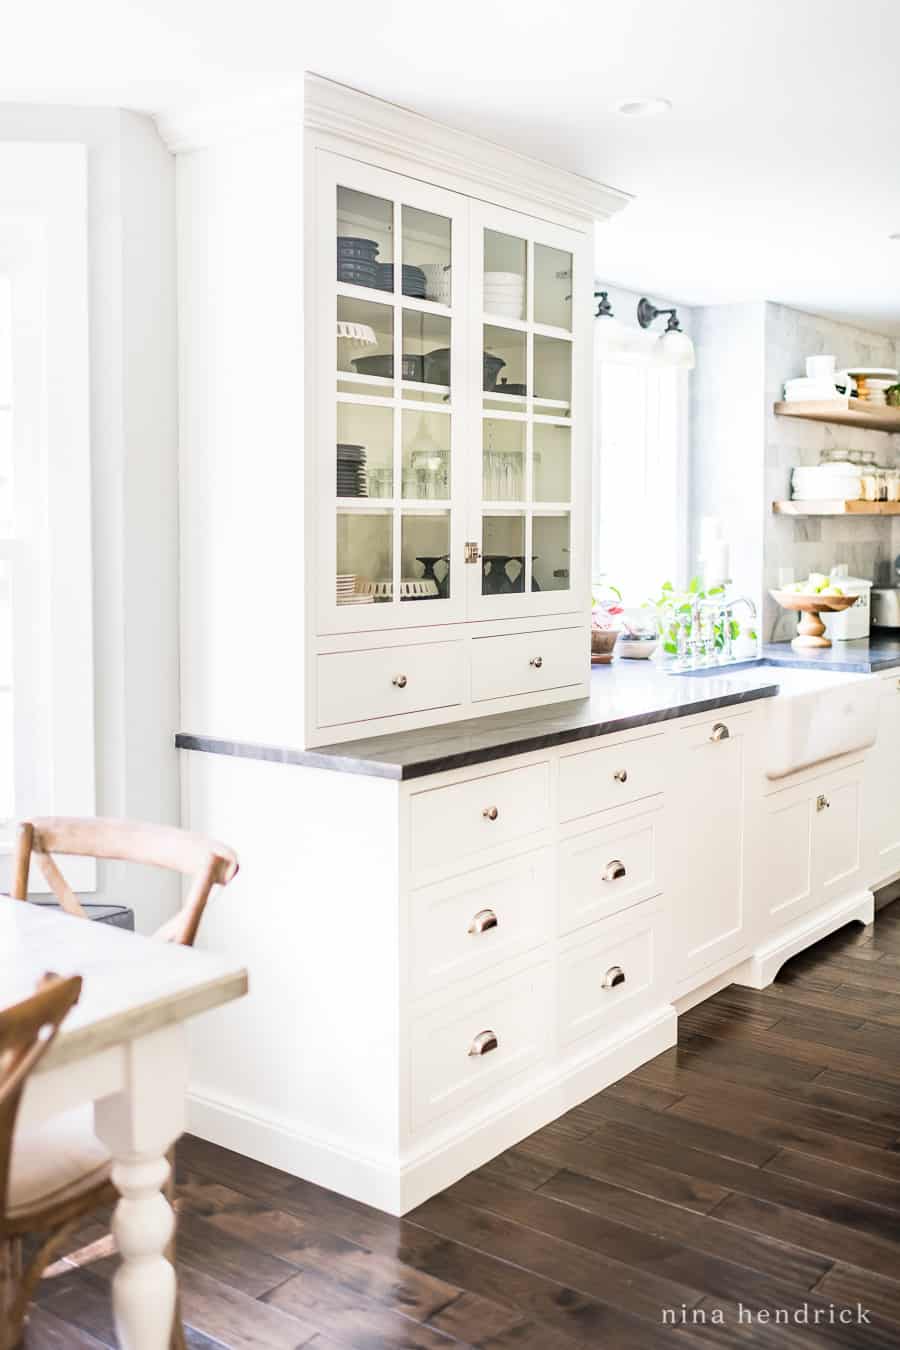 Polar White hutch from Shiloh cabinetry 